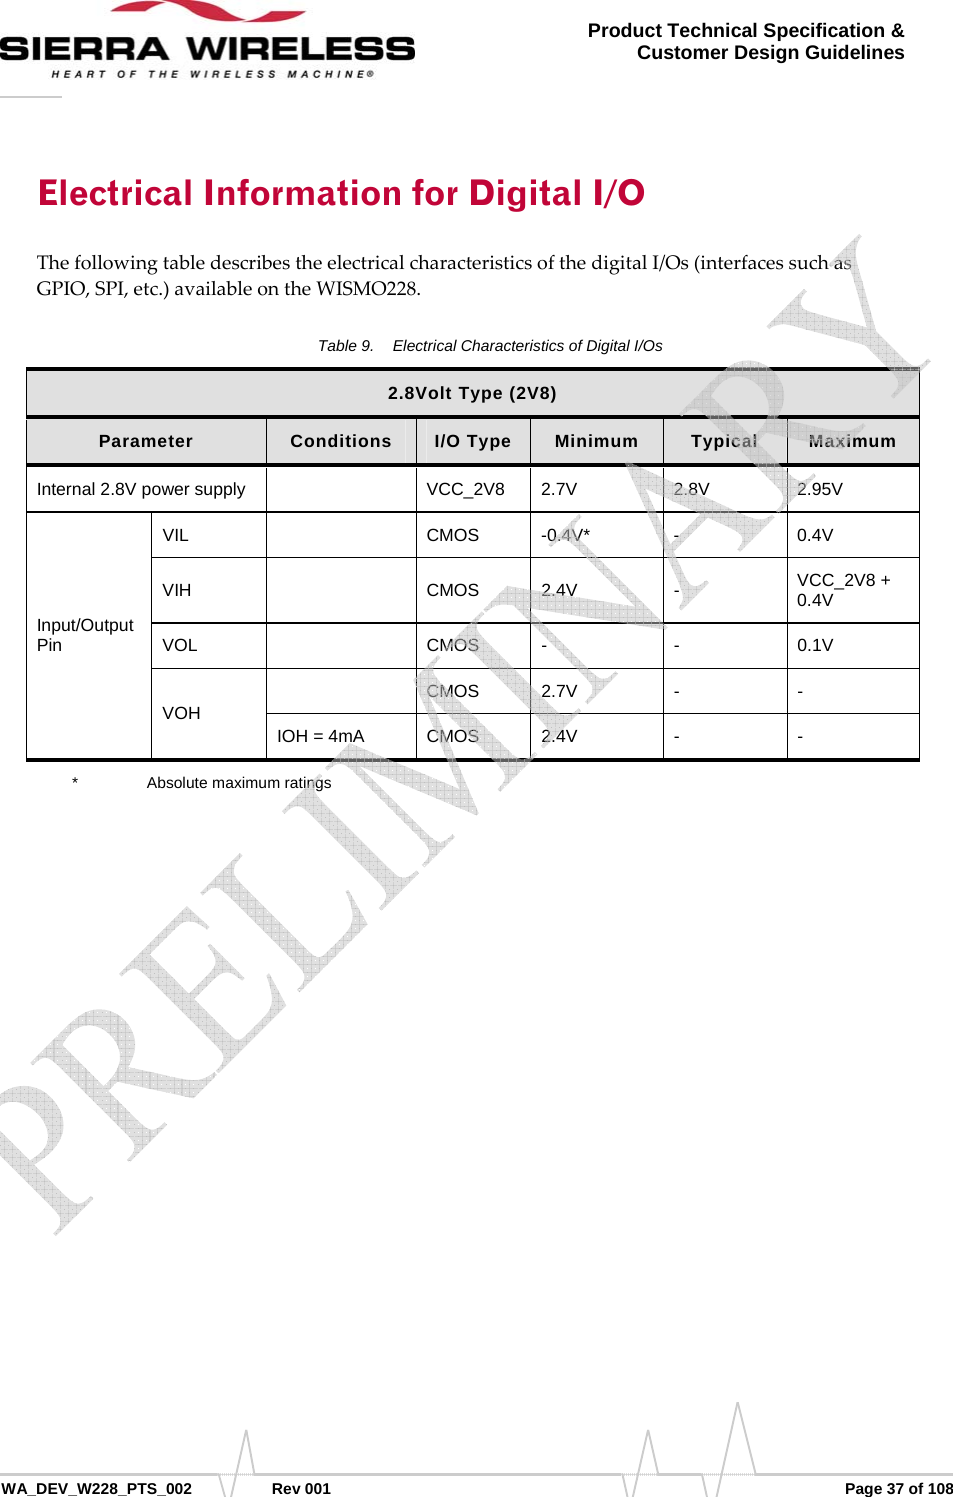      WA_DEV_W228_PTS_002 Rev 001  Page 37 of 108 Product Technical Specification &amp; Customer Design Guidelines Electrical Information for Digital I/O ThefollowingtabledescribestheelectricalcharacteristicsofthedigitalI/Os(interfacessuchasGPIO,SPI,etc.)availableontheWISMO228.Table 9.  Electrical Characteristics of Digital I/Os 2.8Volt Type (2V8) Parameter  Conditions  I/O Type  Minimum  Typical  Maximum Internal 2.8V power supply    VCC_2V8  2.7V  2.8V  2.95V Input/Output Pin VIL   CMOS -0.4V* -  0.4V VIH   CMOS 2.4V  -  VCC_2V8 + 0.4V VOL   CMOS -  -  0.1V VOH  CMOS 2.7V - - IOH = 4mA CMOS 2.4V  -  - *    Absolute maximum ratings    